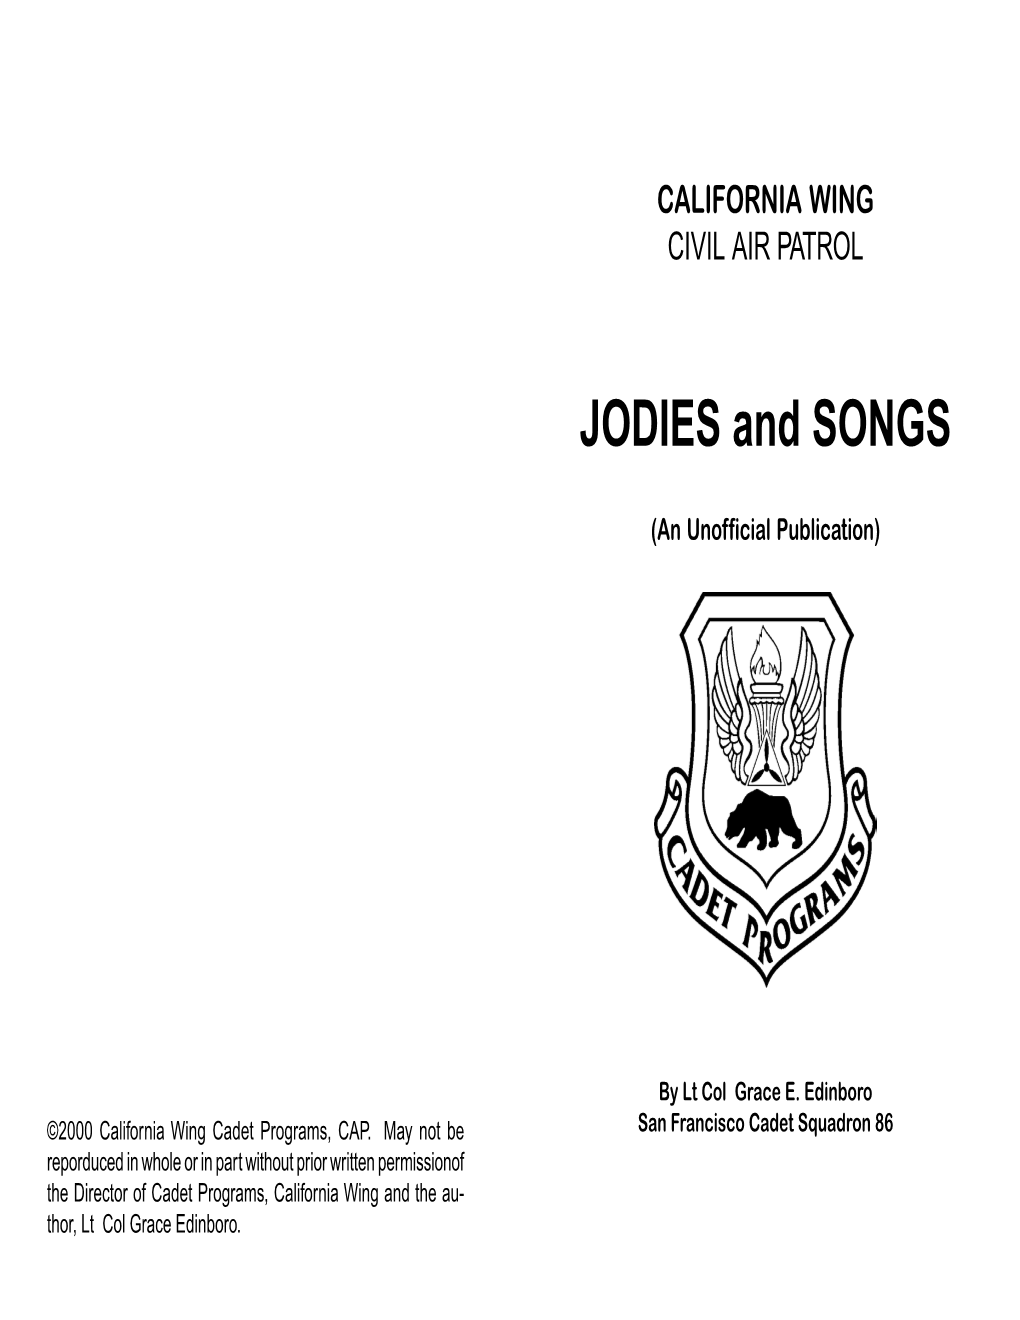 JODIES and SONGS